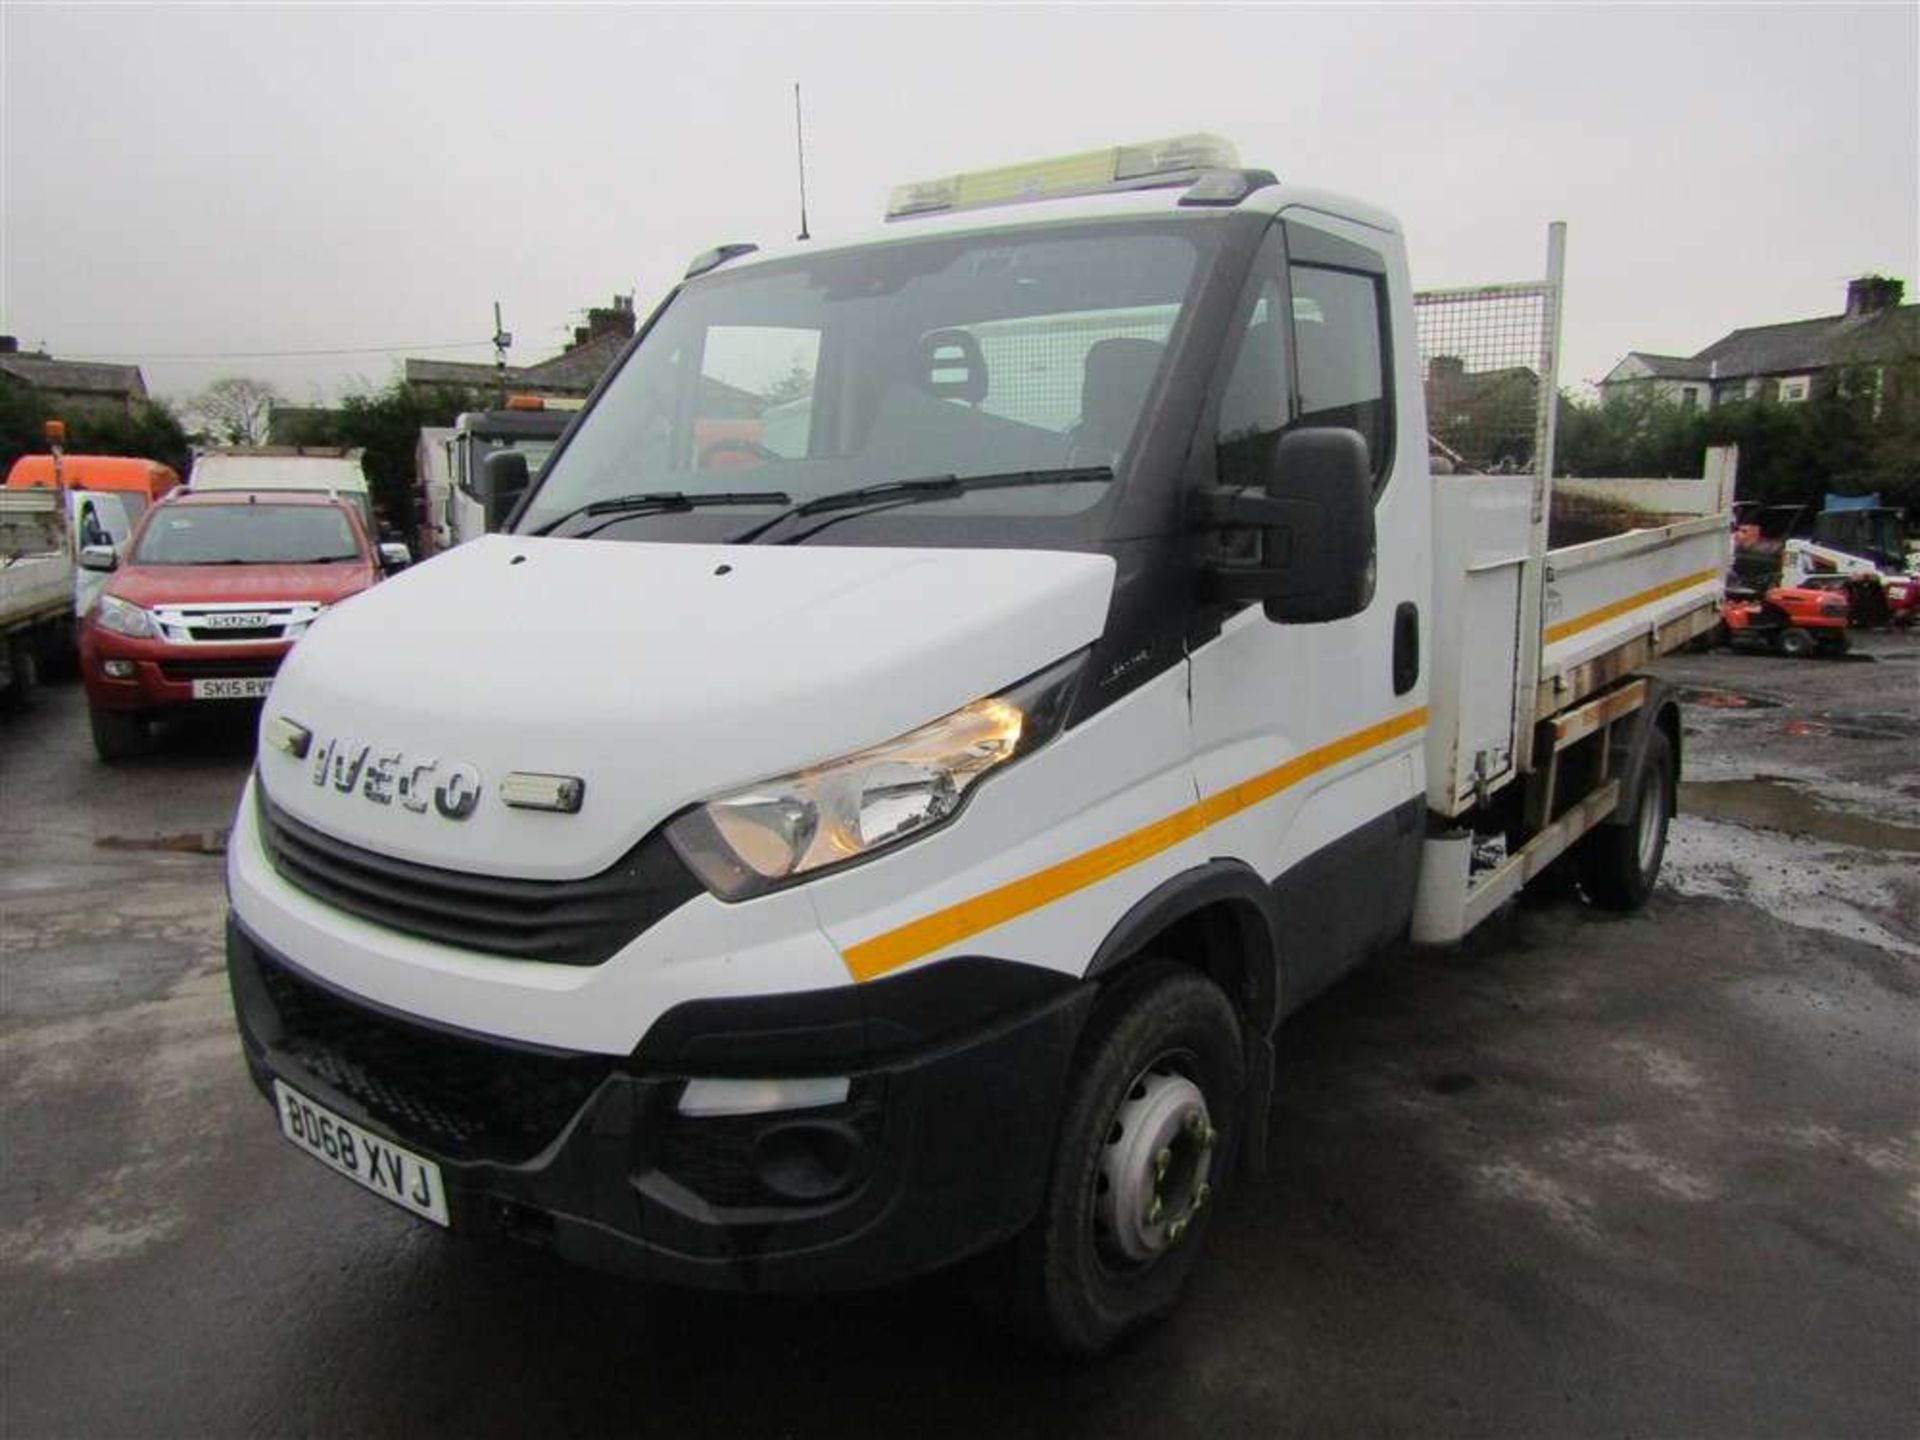 2018 68 reg Iveco Daily 70C18 Tipper (Runs & Drives but Starter / Clutch Issues) (Direct Council) - Image 2 of 6